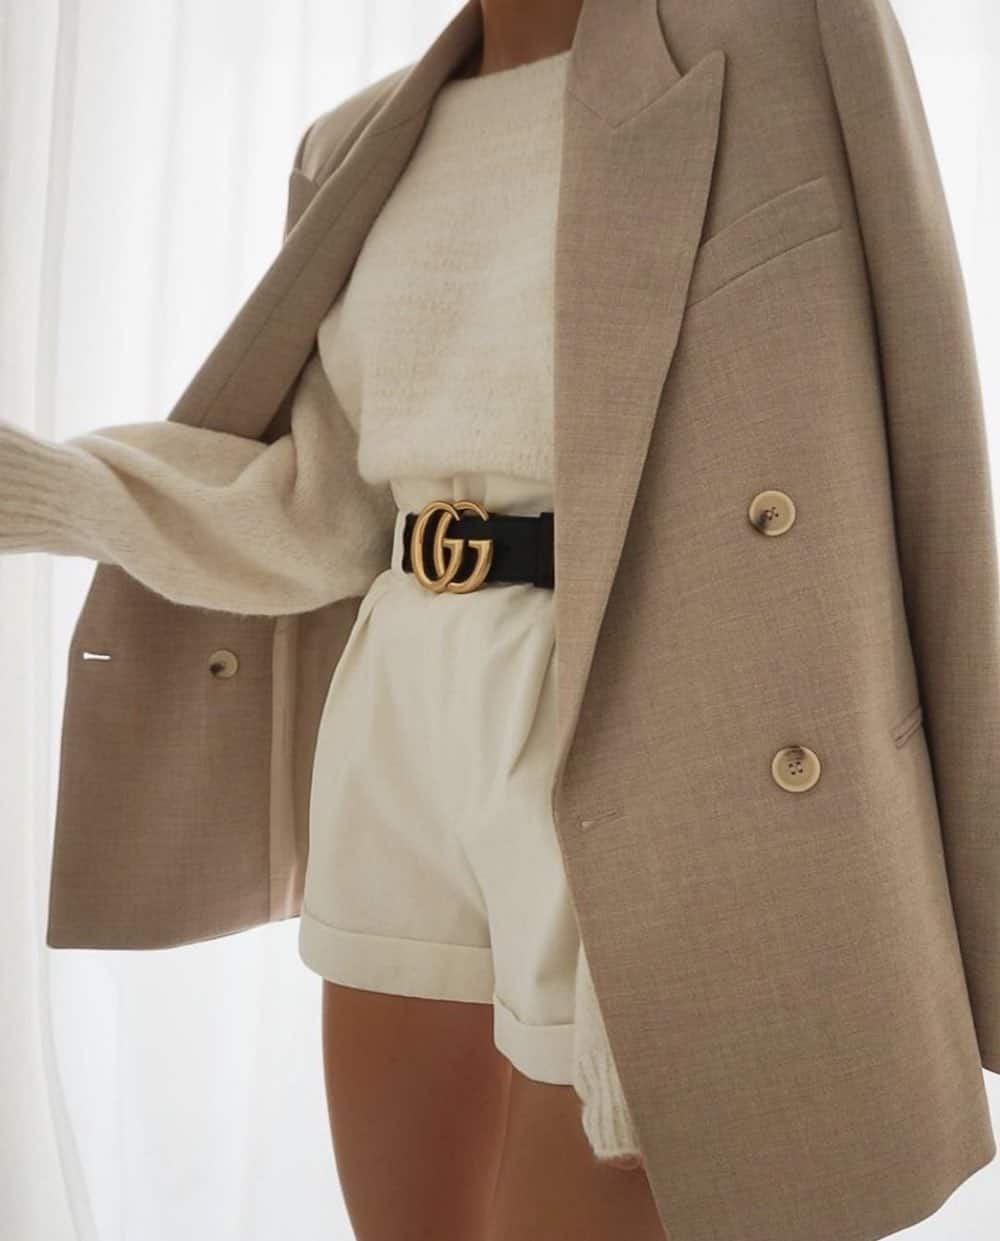 image of a woman from the shoulders down wearing a white sweater and white shorts with a black logo Gucci belt and an oversized beige blazer over her shoulders